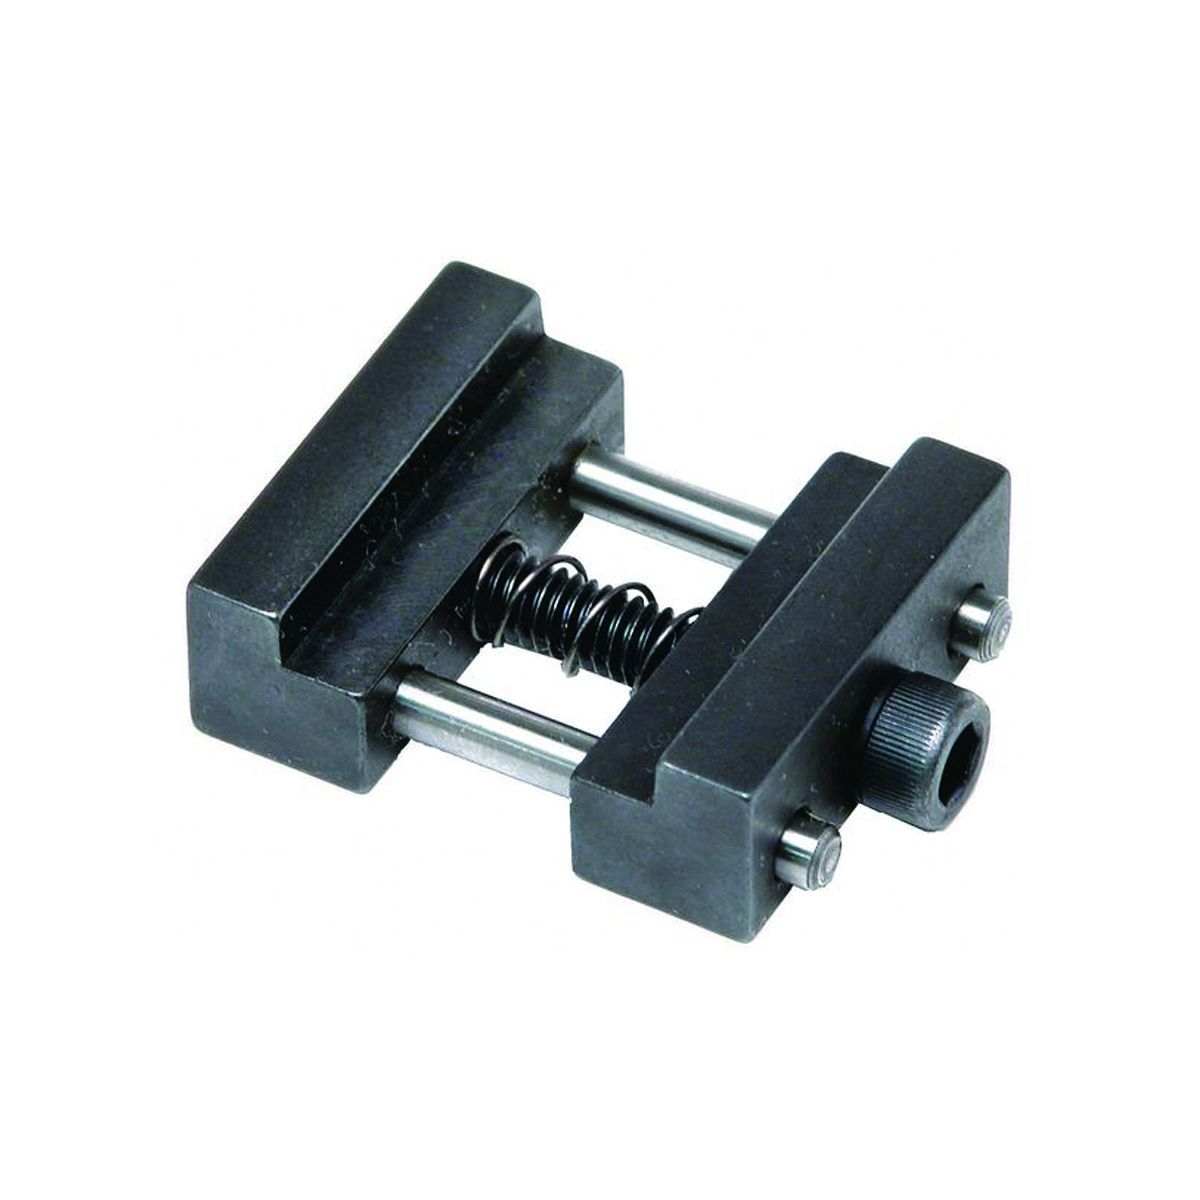 QUICK CLAMP VISE WORK STOP - FITS 1/2-7/8" JAWS (3906-2132)